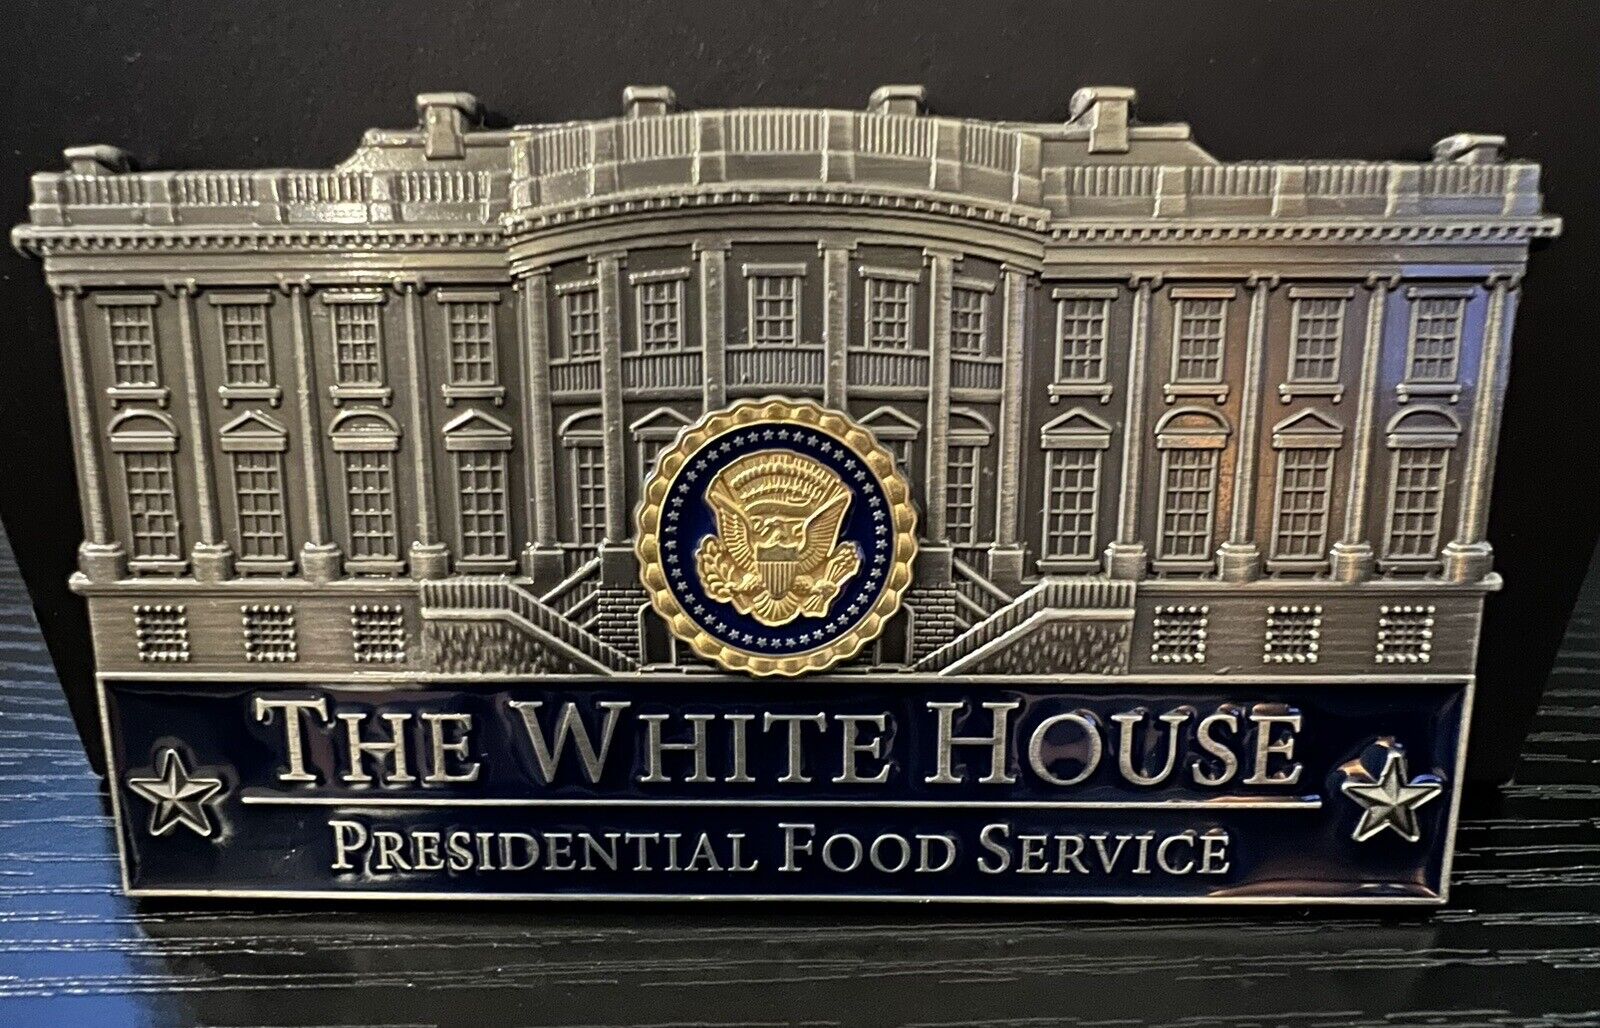 White House Presidential Food Service Coin (Authentic POTUS/White House Issued)